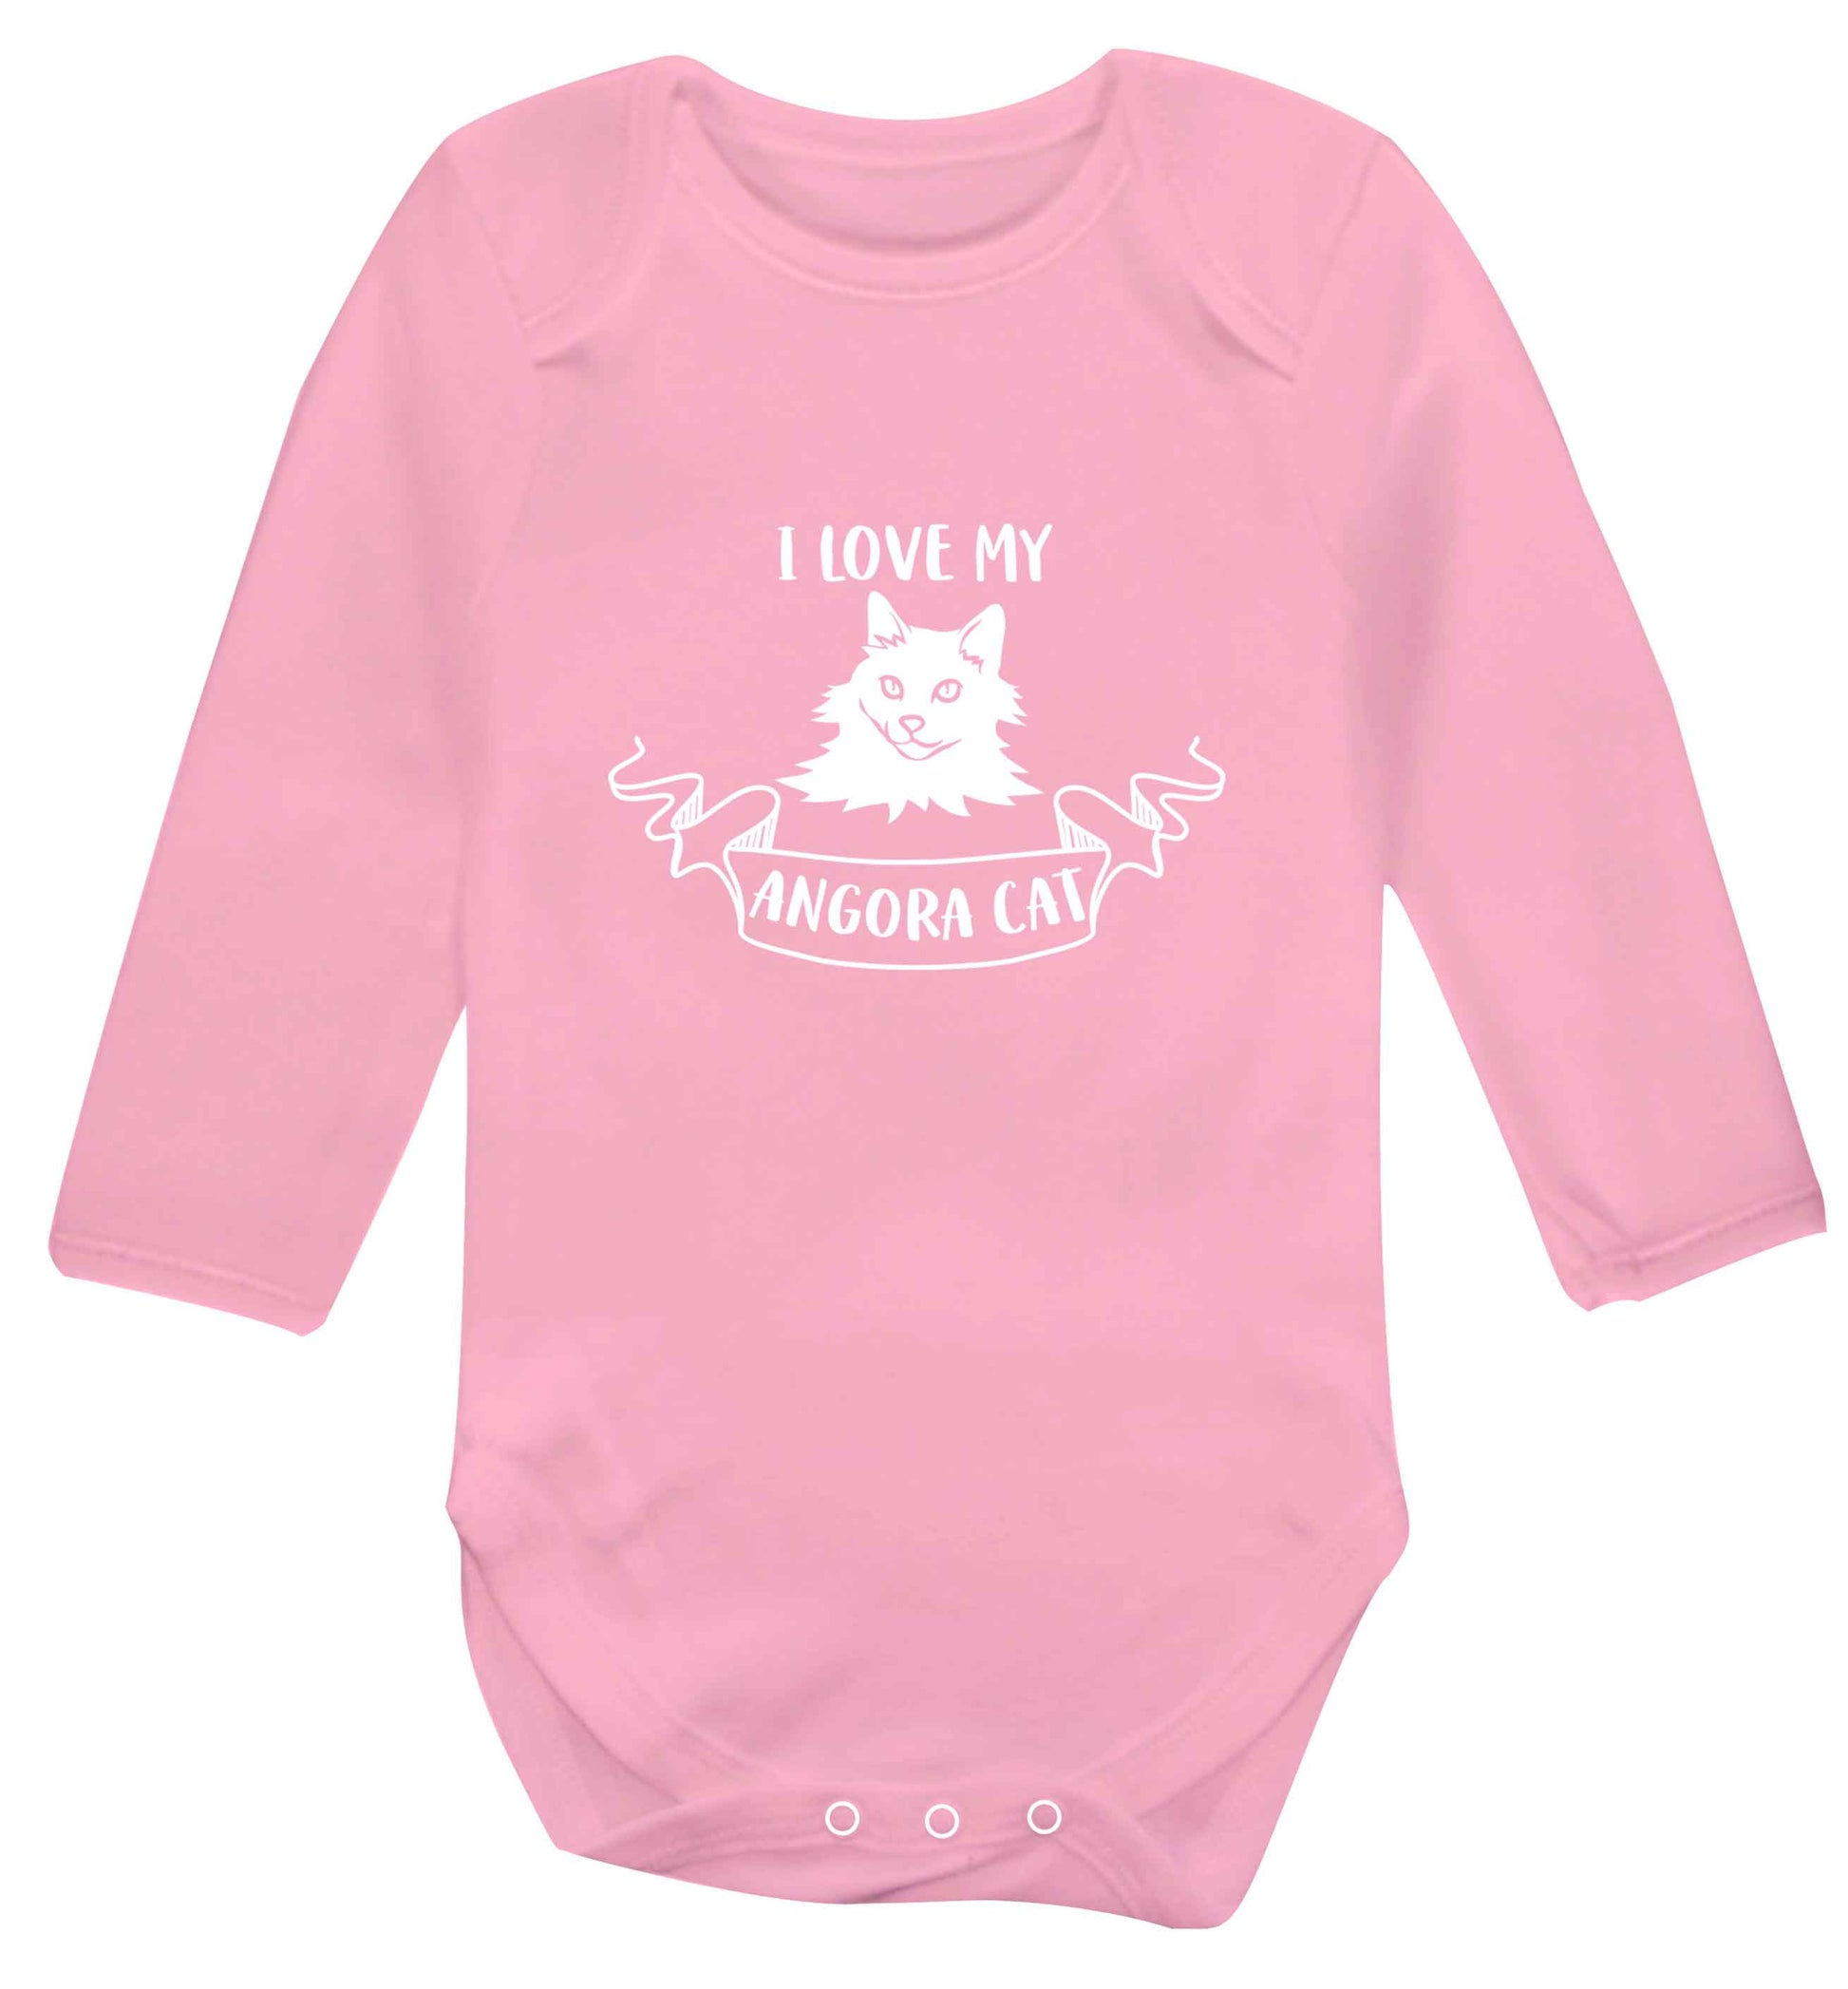 I love my angora cat baby vest long sleeved pale pink 6-12 months